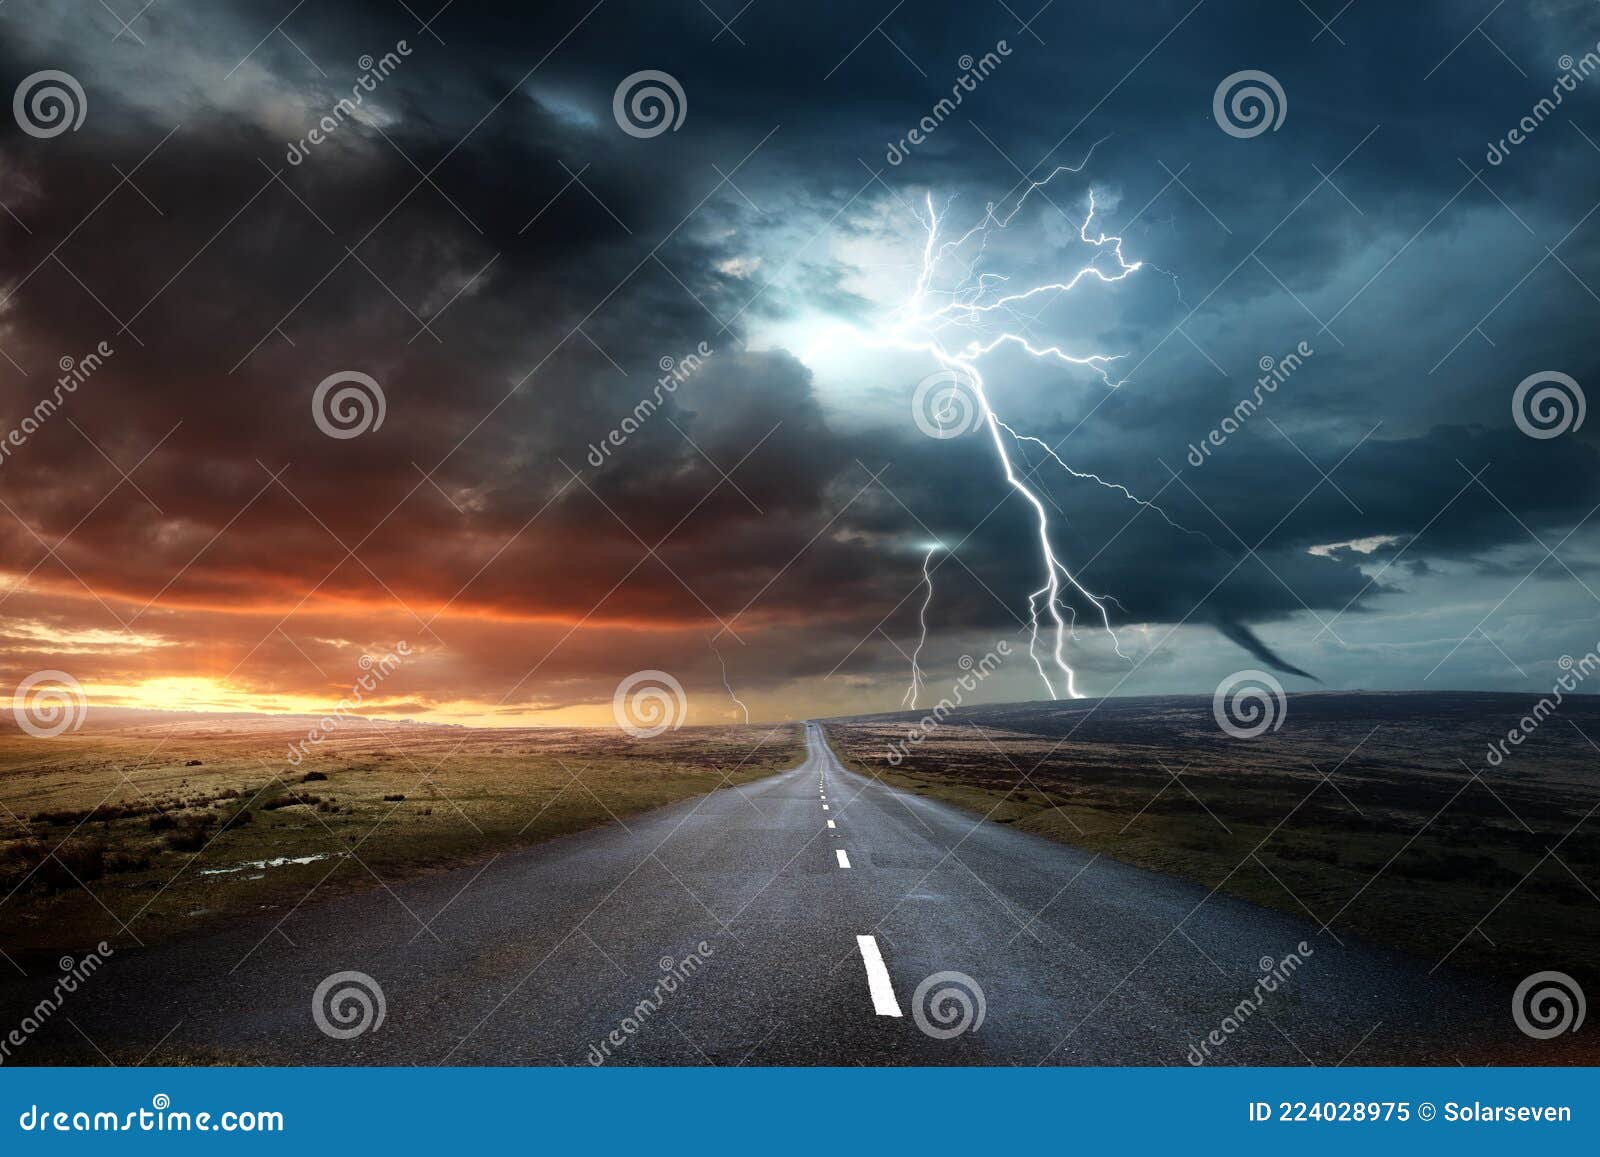 weather thunderstorm climate change